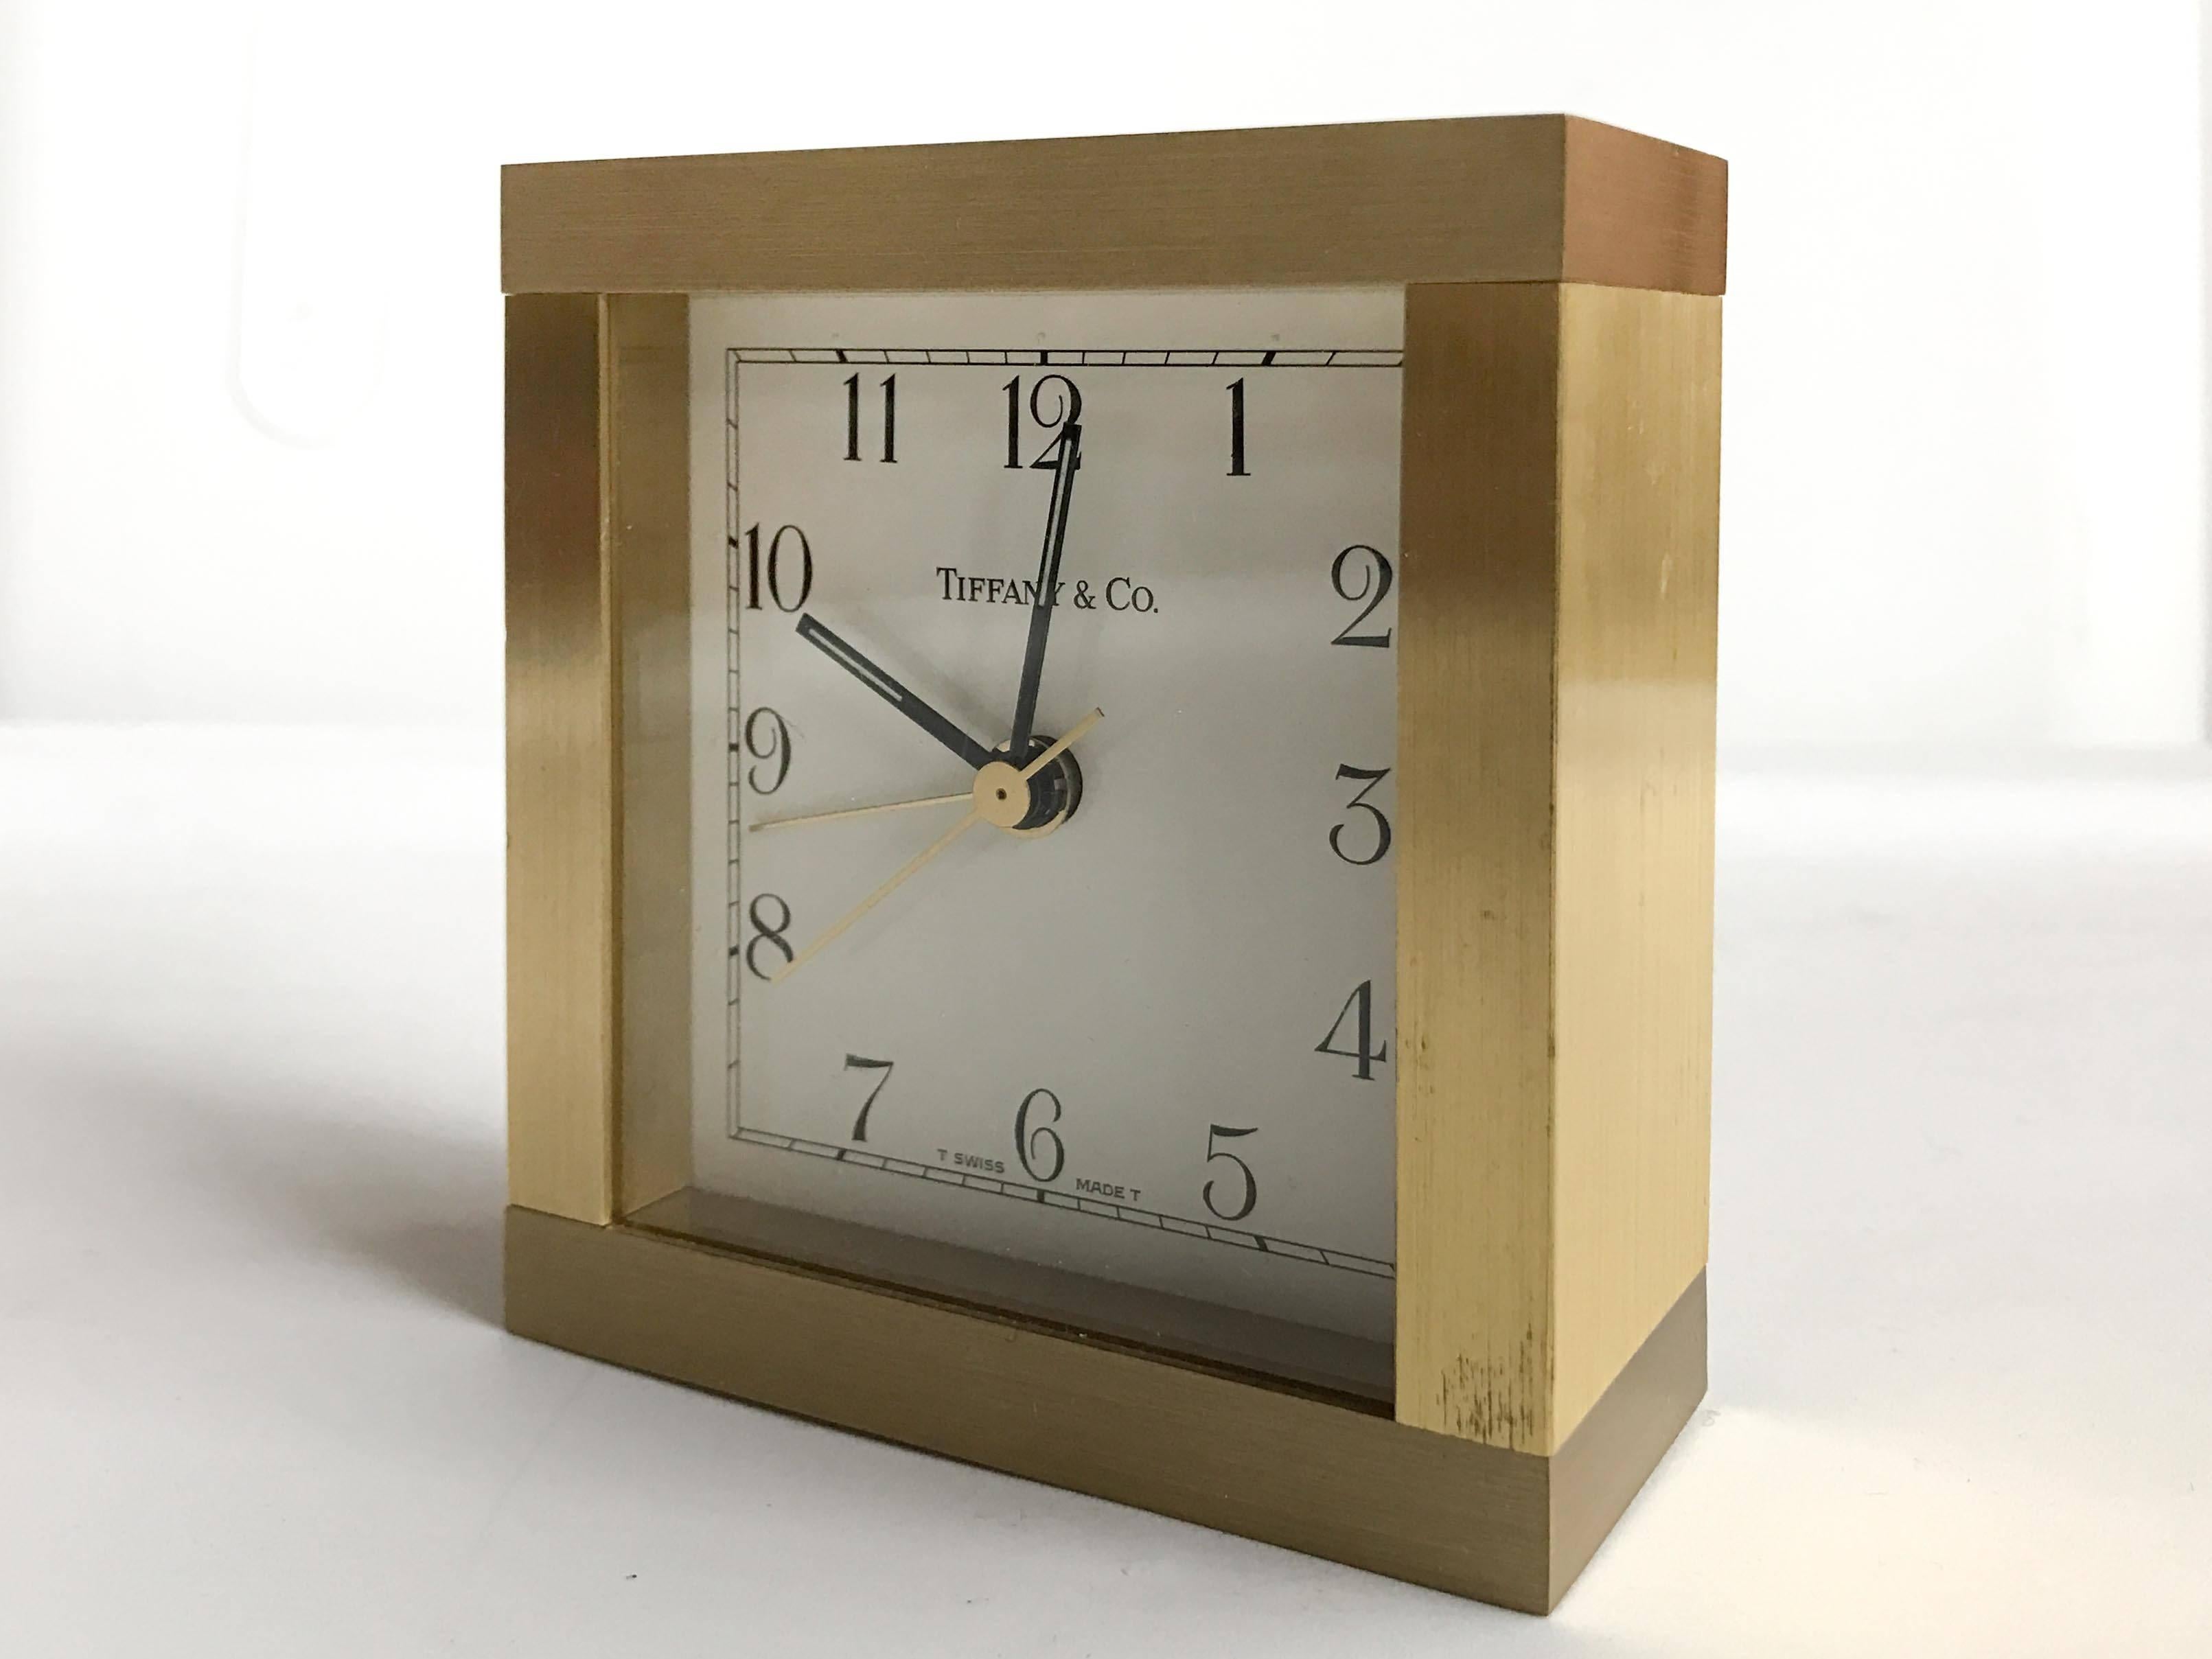 Small square desk clock made of brass and marked Tiffany & Co. Good working condition with minor wear to the case, some burnishing to the top, please see photos.